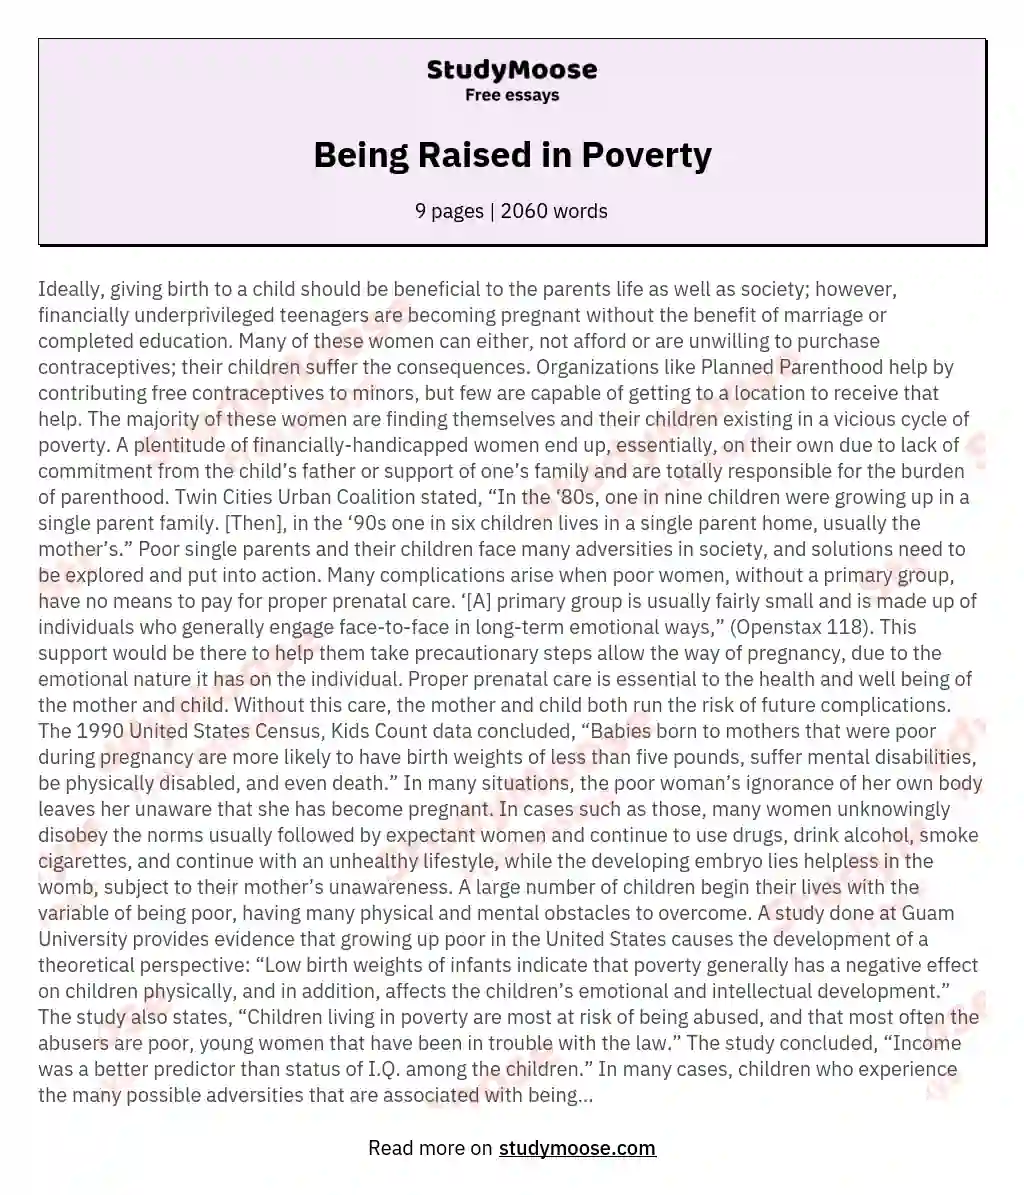 Being Raised in Poverty essay